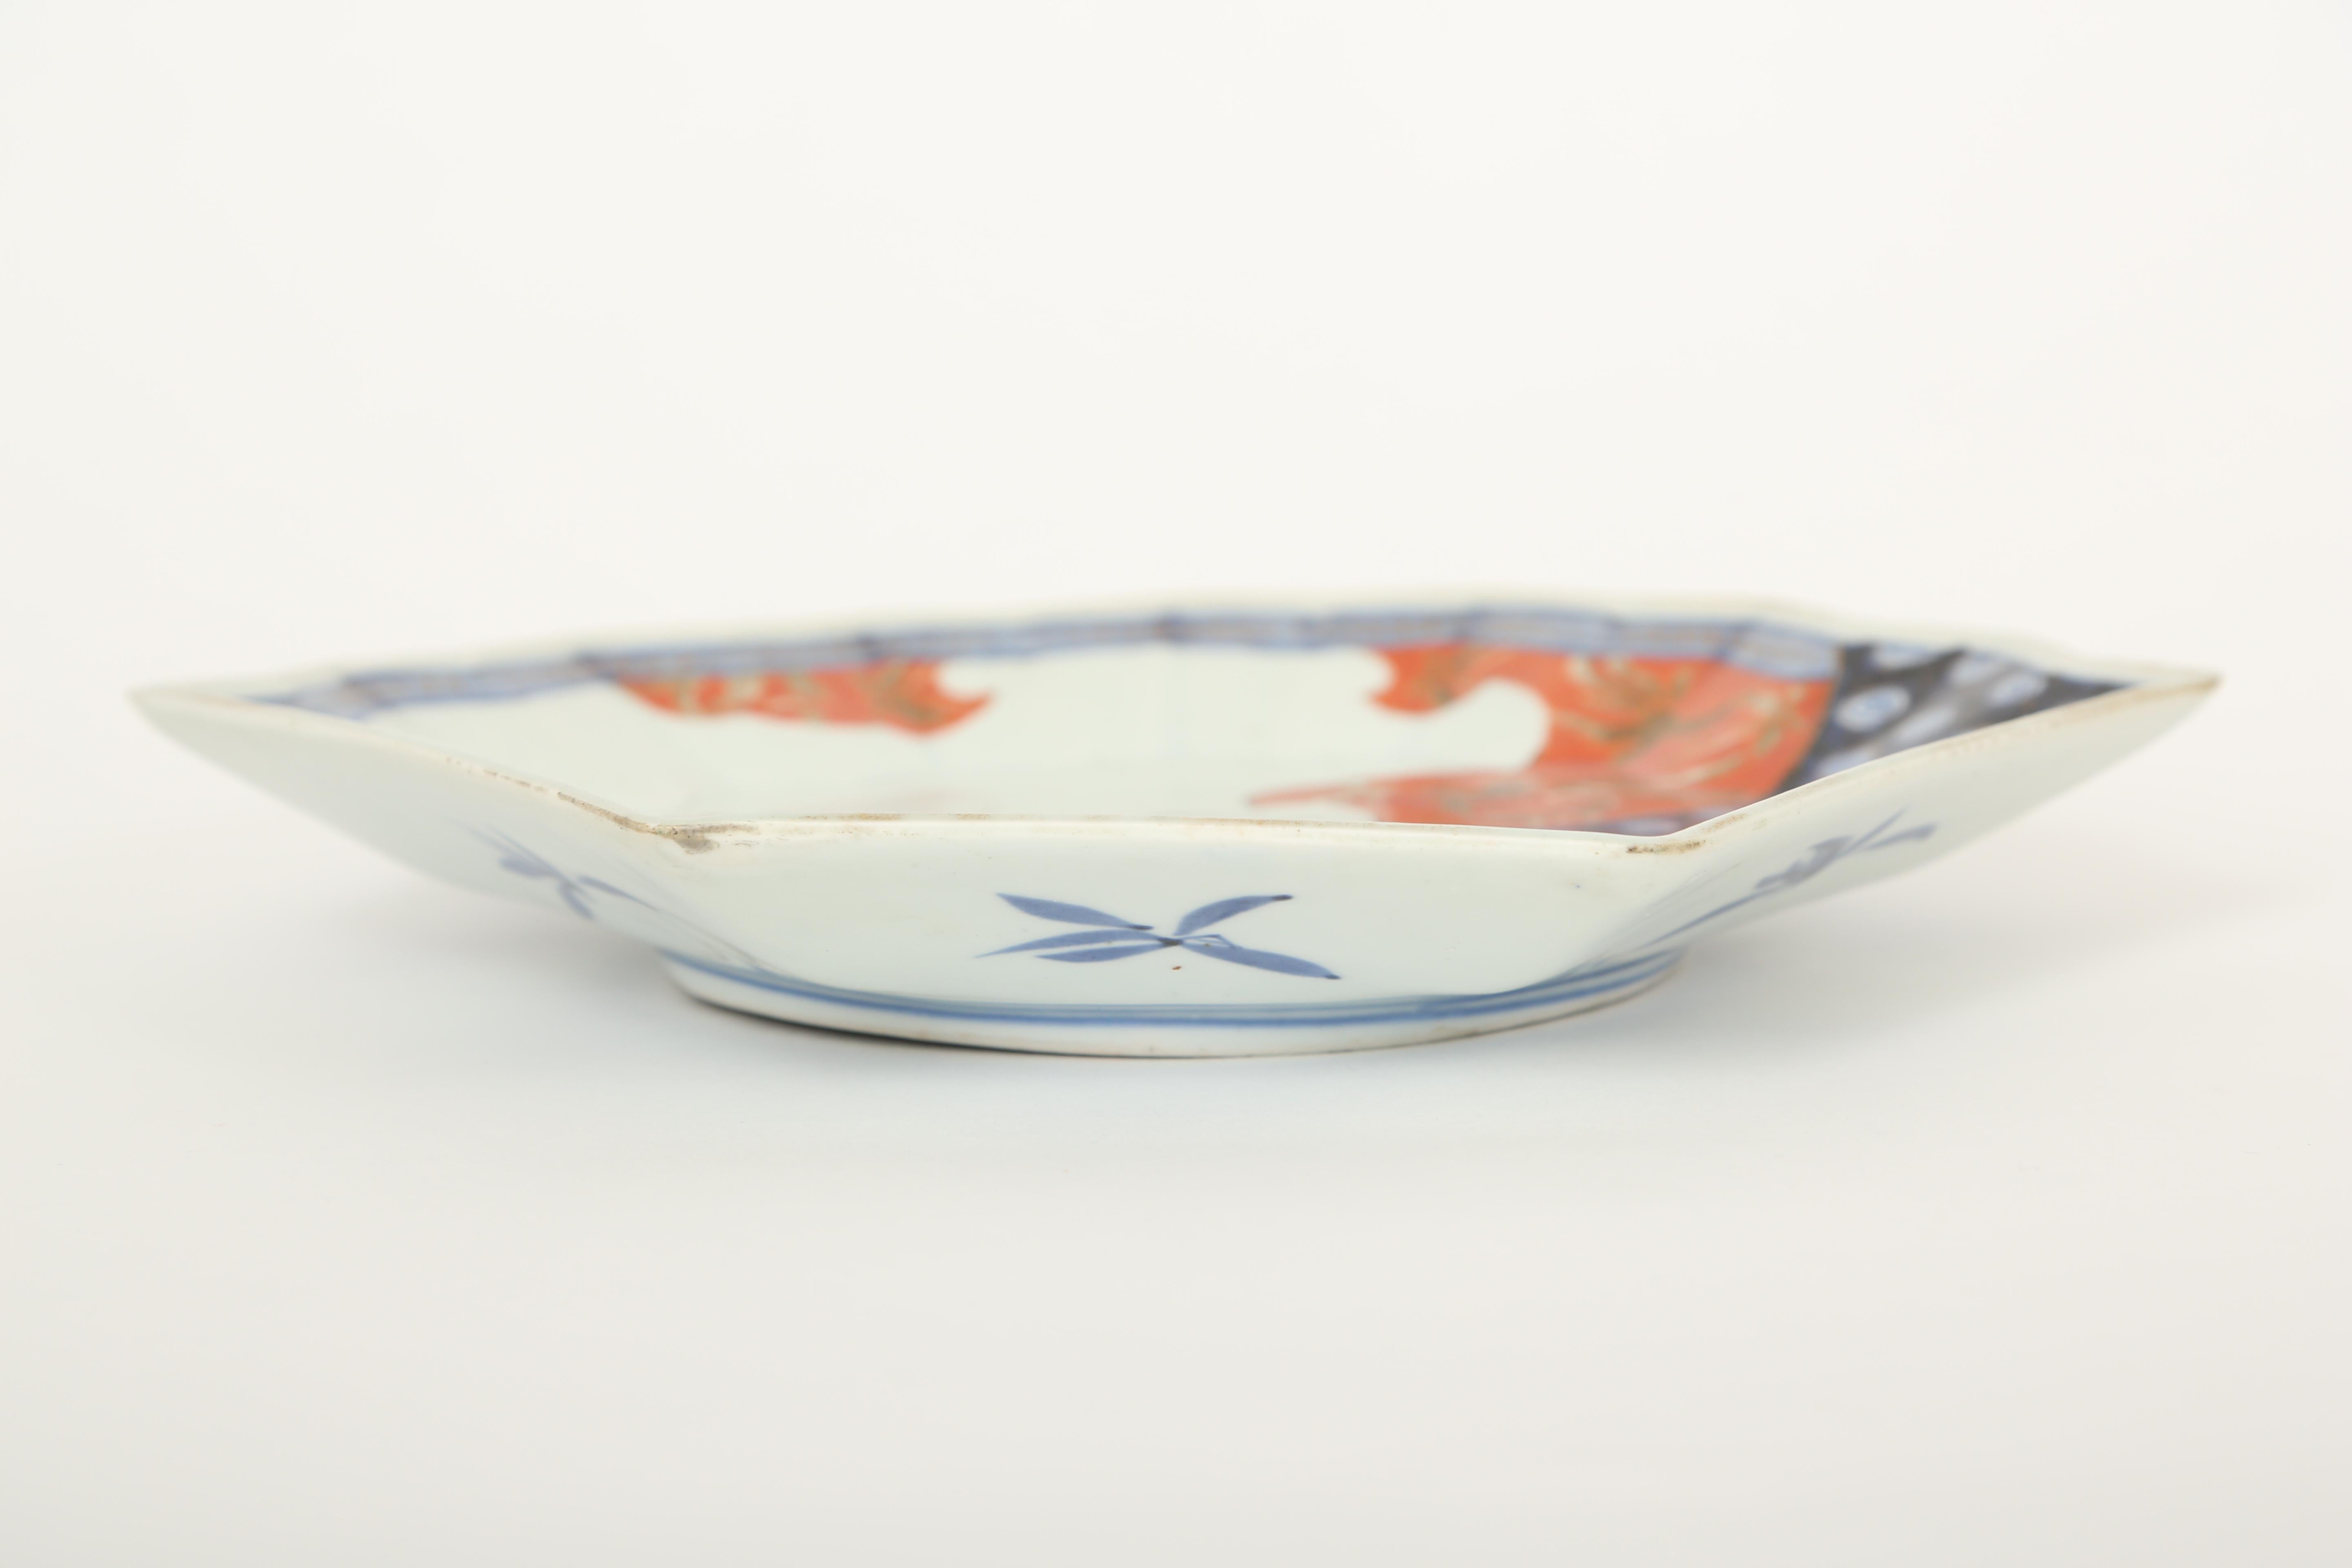 Hand-Crafted Fan Shaped Imari Serving Plate,  Japan, Meiji Period, 19th Century